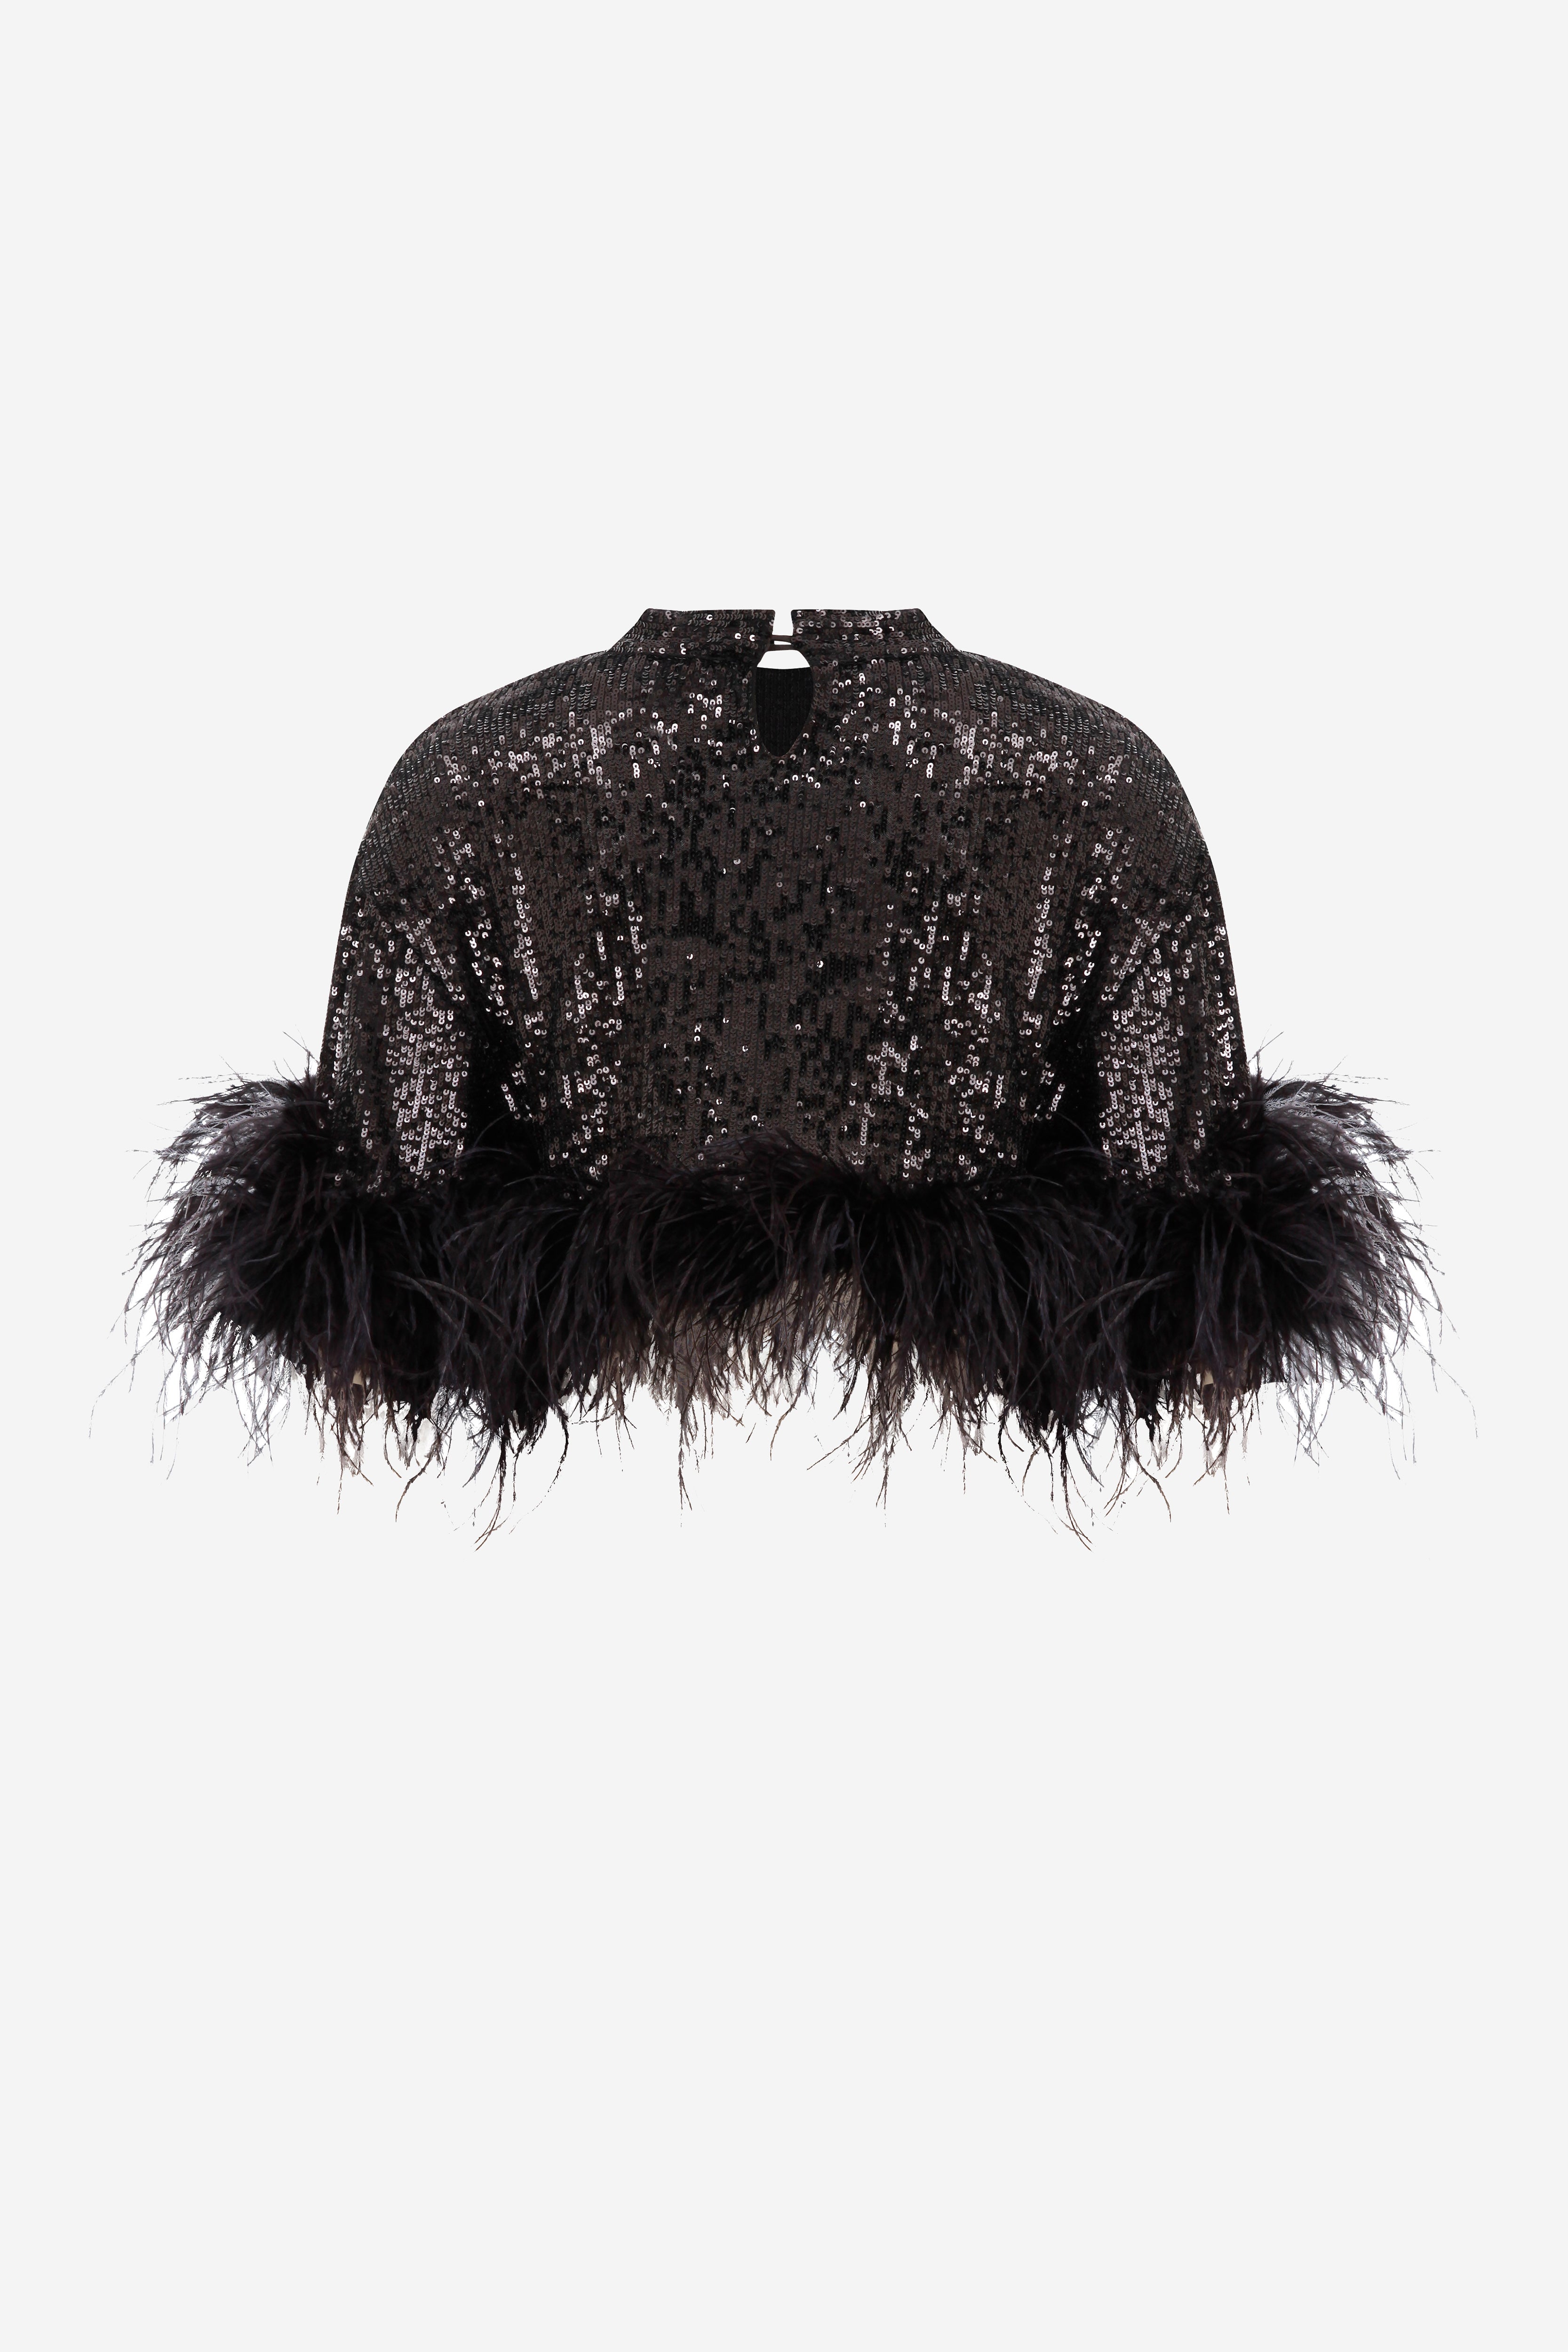 Camille - CROP TOP WITH FEATHERS in Black